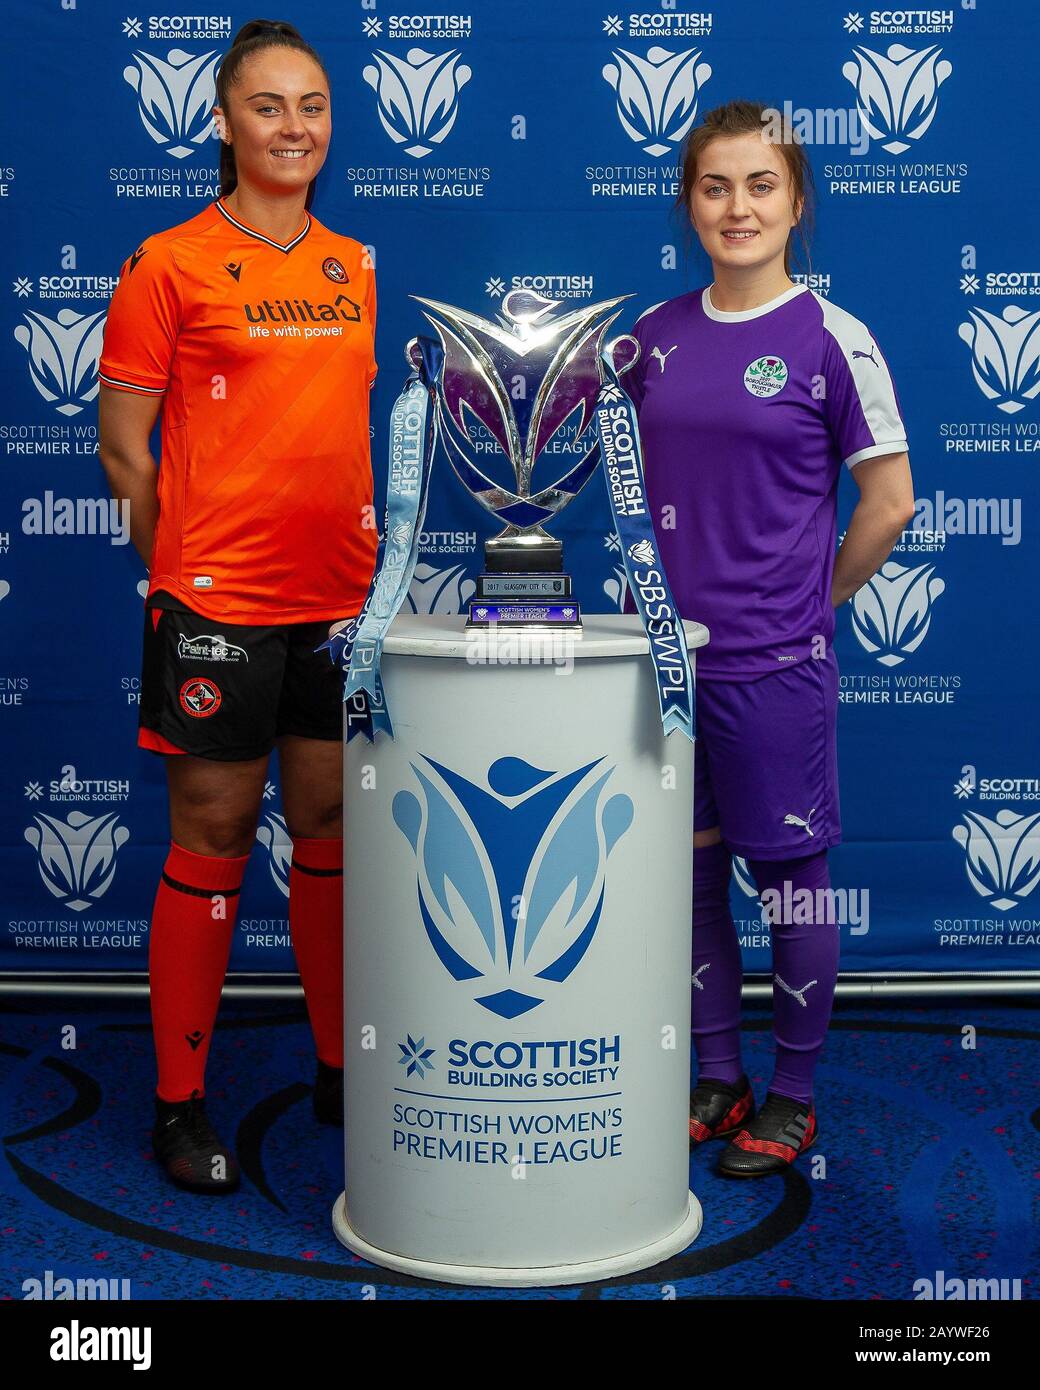 Glasgow, UK. 17th Feb 2020. Keira Johnstone of Dundee United & Hannah Markley of Boroughmuir Thistle during the Scottish Building Society Scottish Women's Premier League Season Launch Event at The National Stadium, Hampden Park, Glasgow, Monday 17th February 2020 | Credit Colin Poultney/Alamy Live News Stock Photo